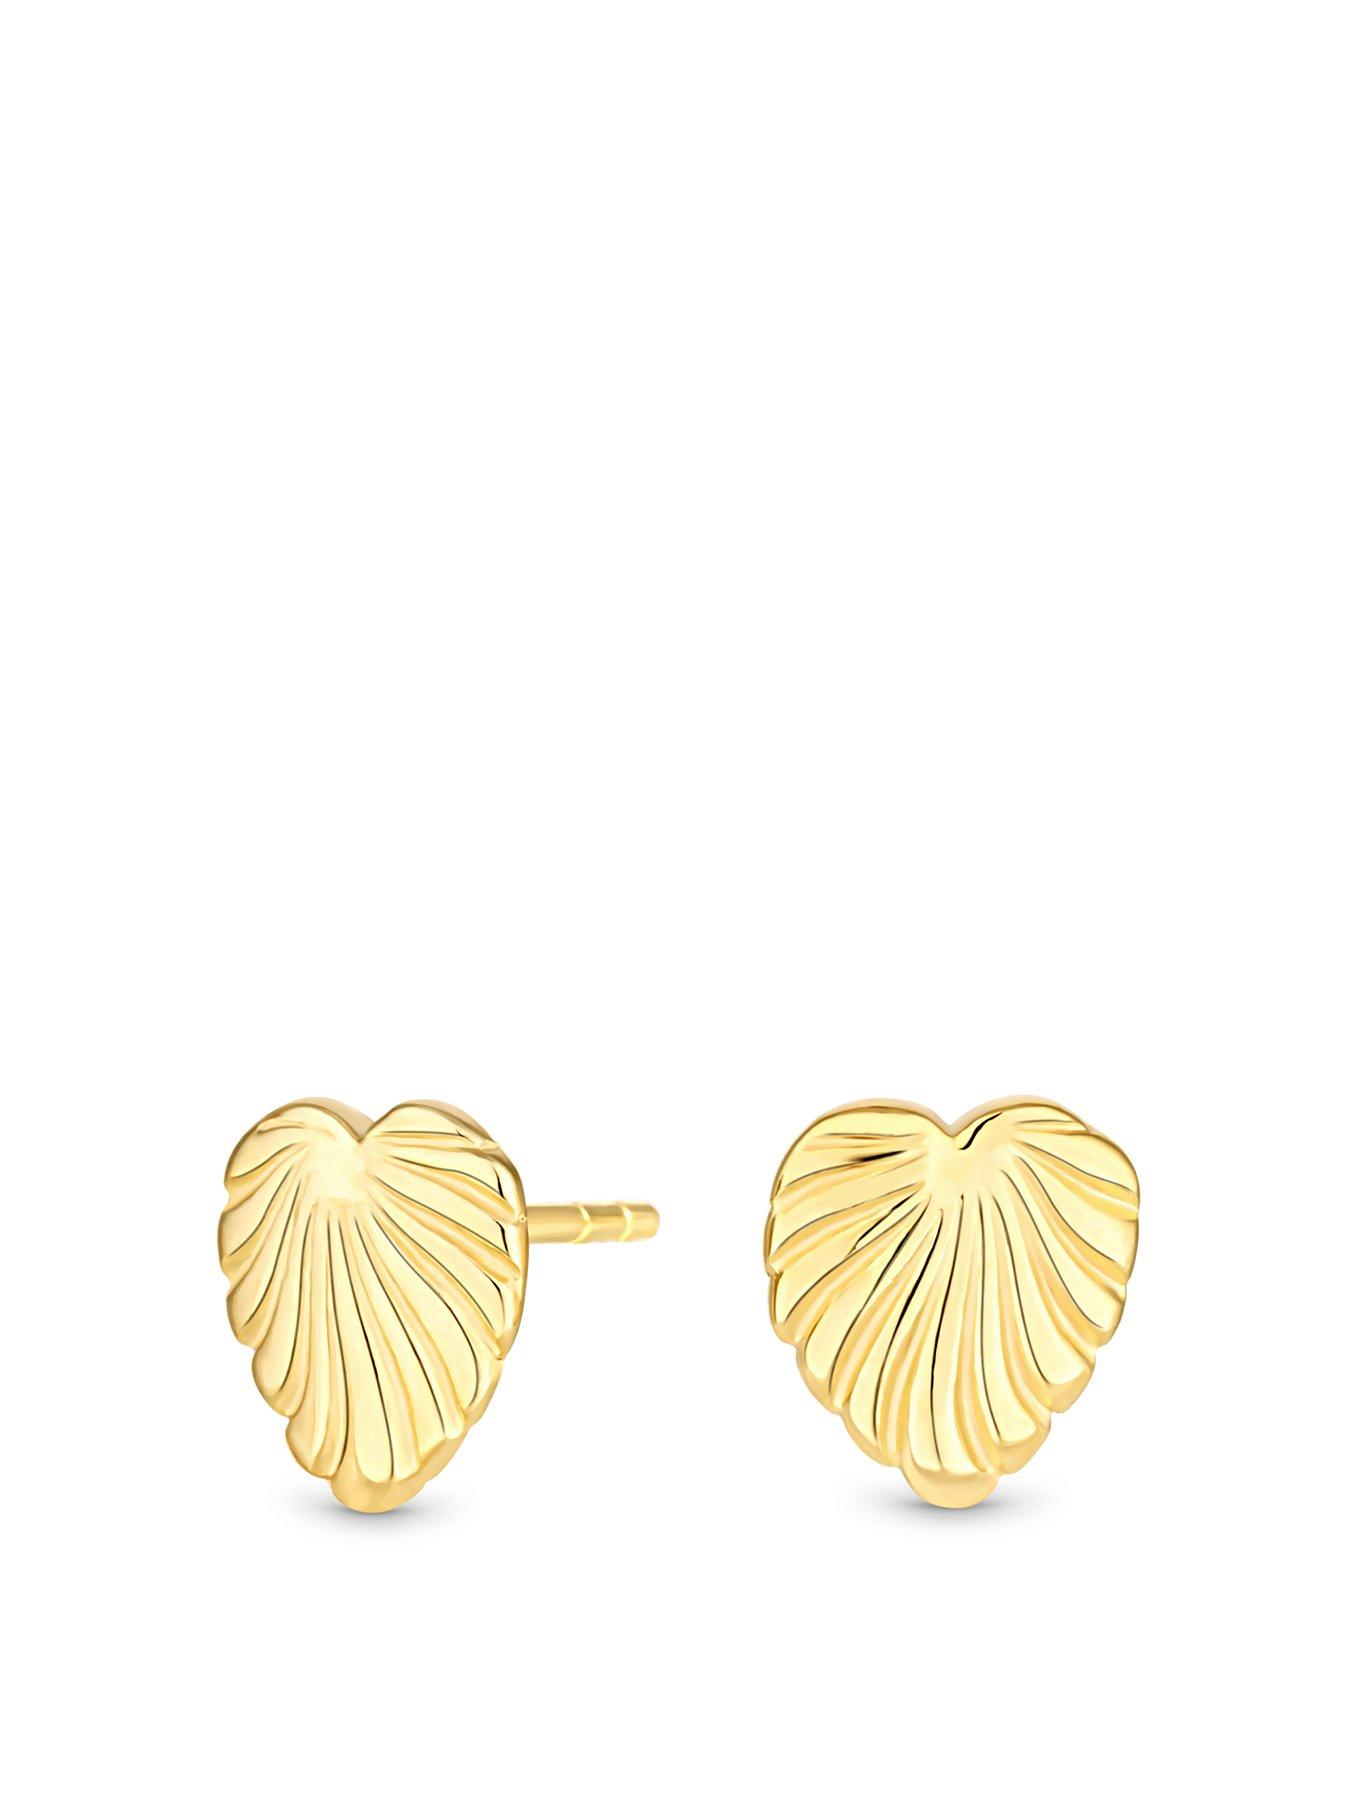 Jewellery & watches Gold Plated Sterling Silver Heart Shell Stud Earrings